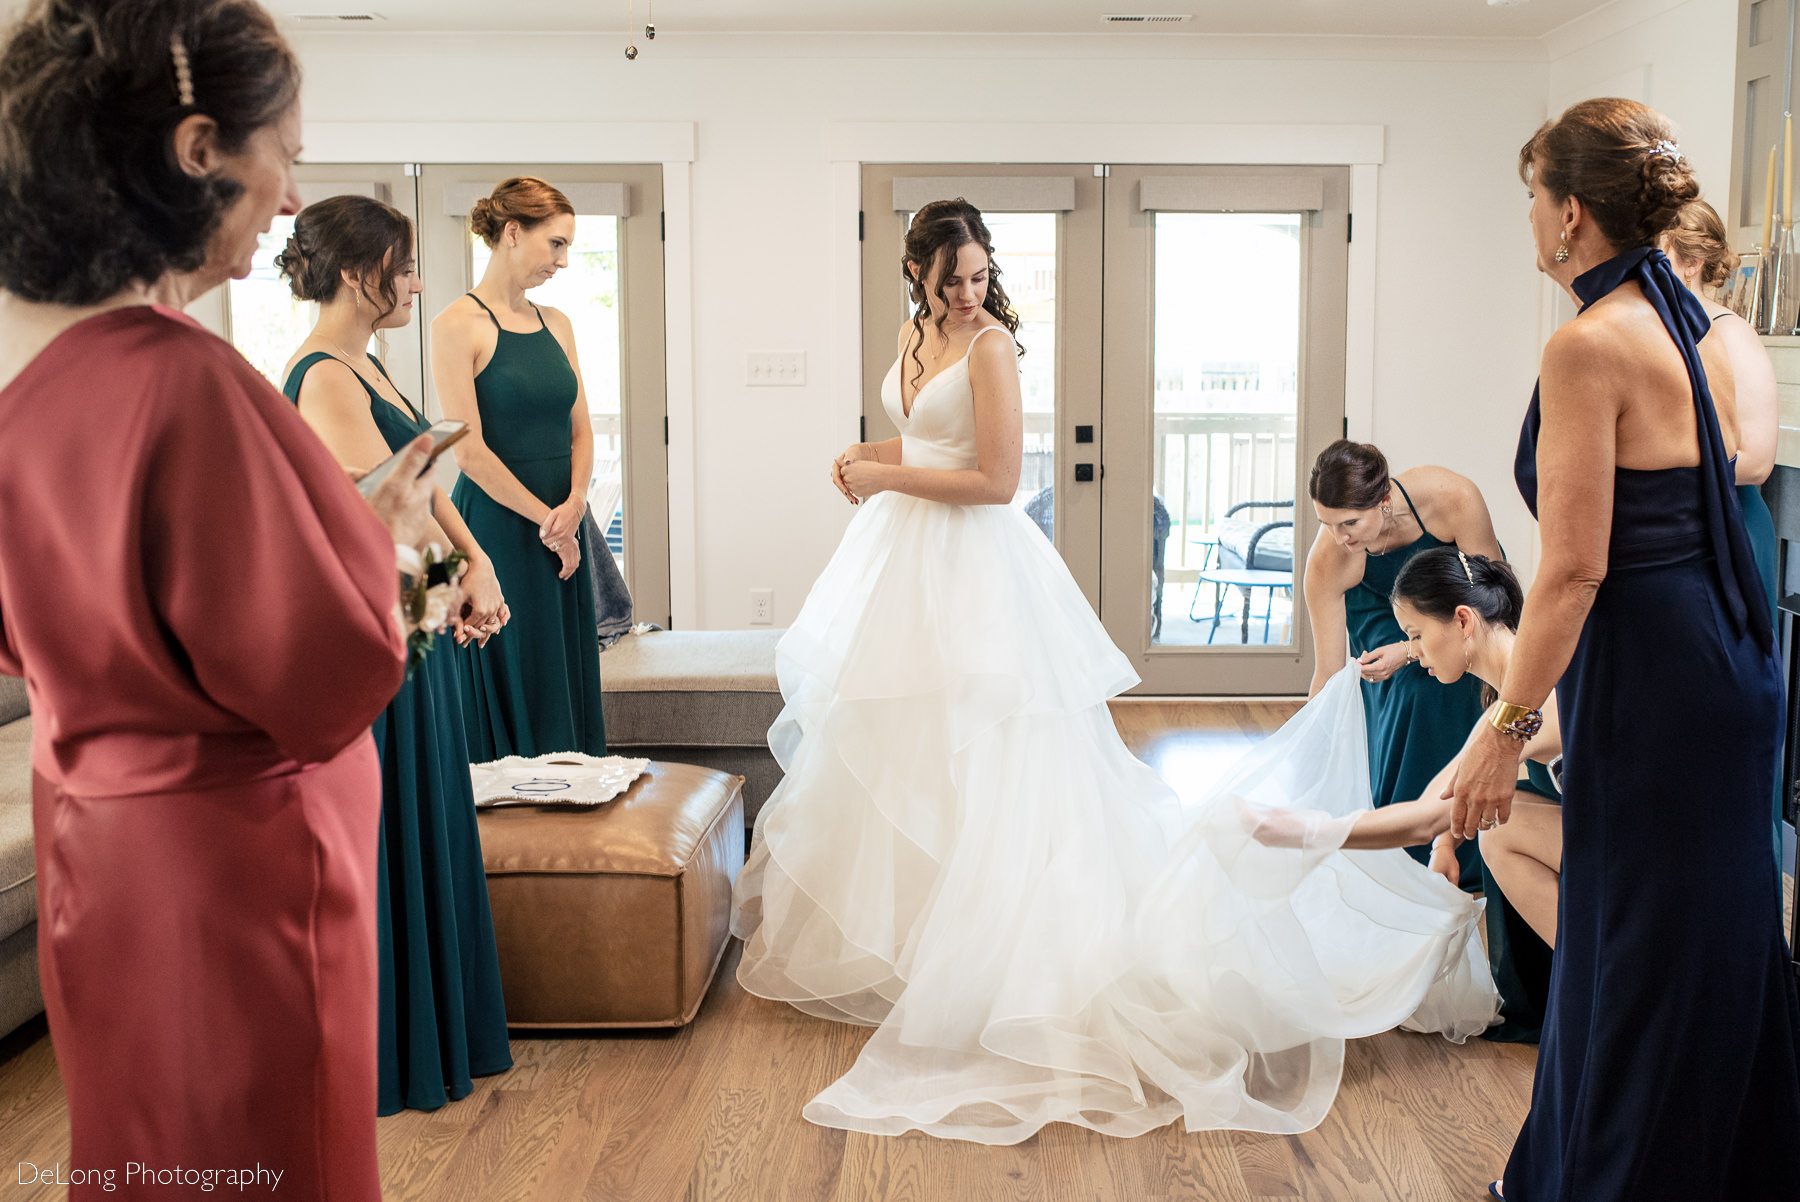 Candid moment of bridesmaids adjusting the bride's dress during getting ready by Charlotte wedding photographers DeLong Photography